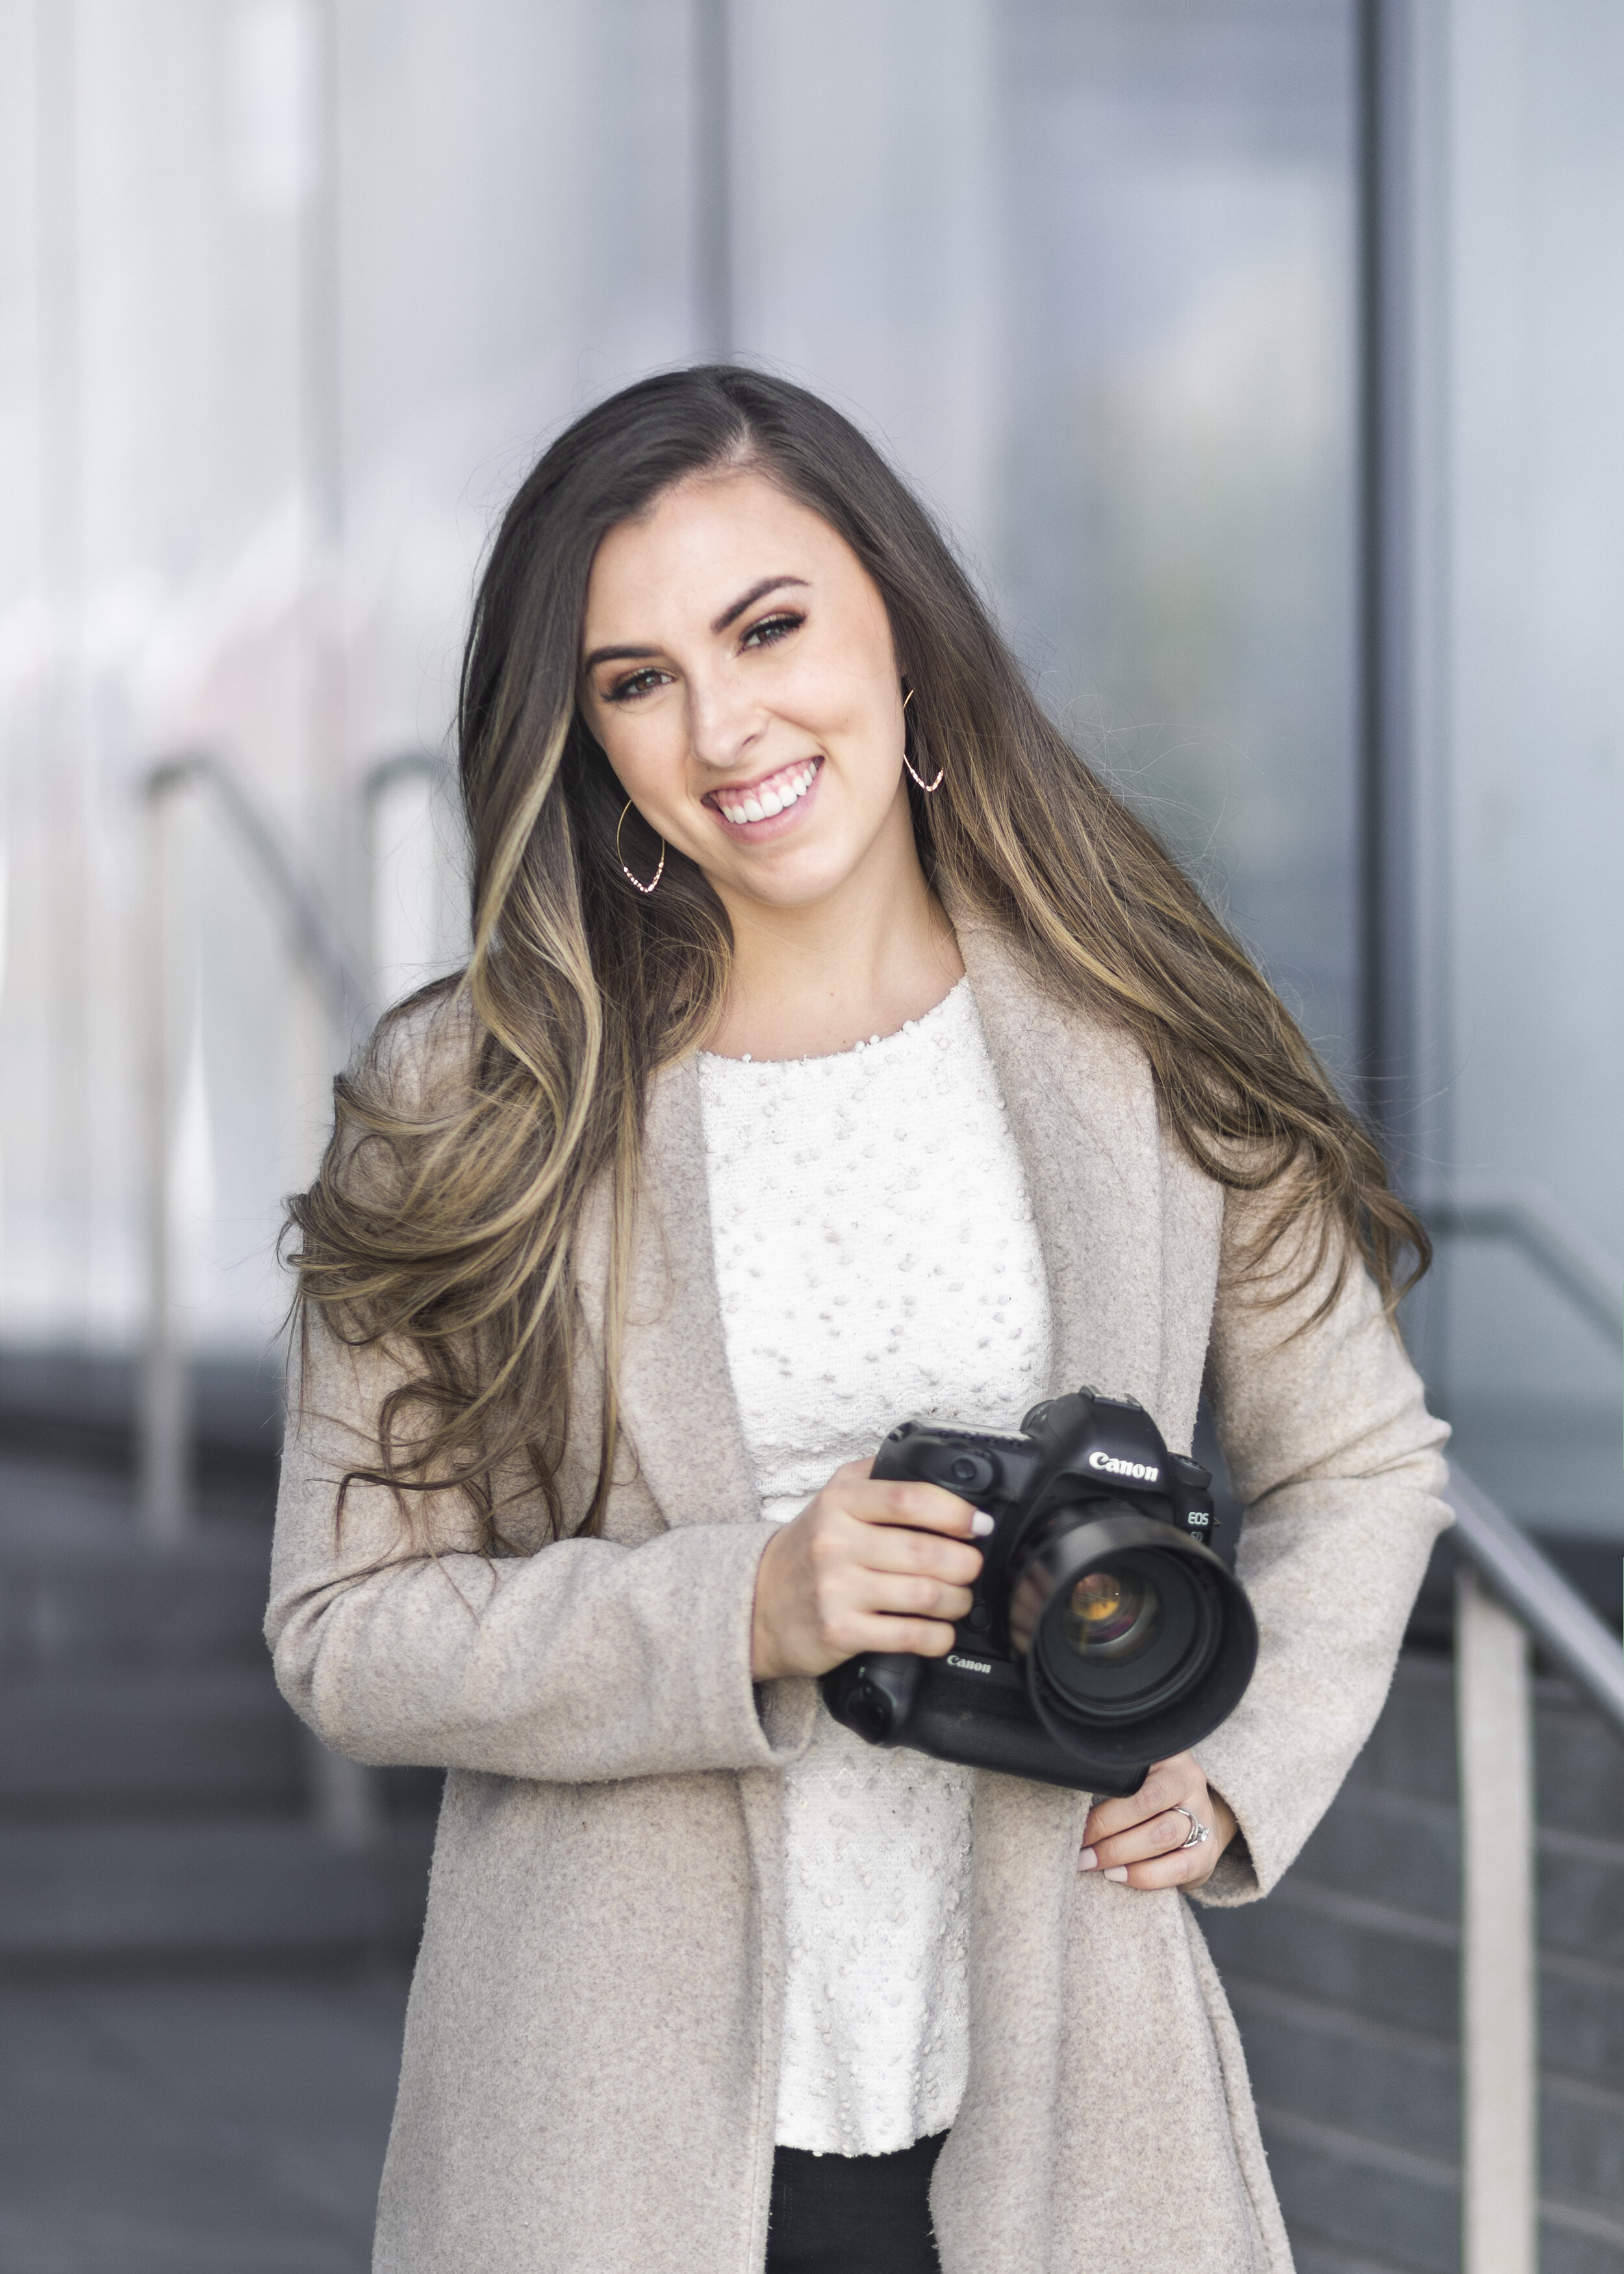  The owner of Utah County’s Clarity Lane Photography poses with her Canon DSLR camera in Salt Lake City, Utah. loose curled long balayage hair, open long khaki womens trench coat cardigan,  canon dslr camera, utah valley professional photographer #Sa